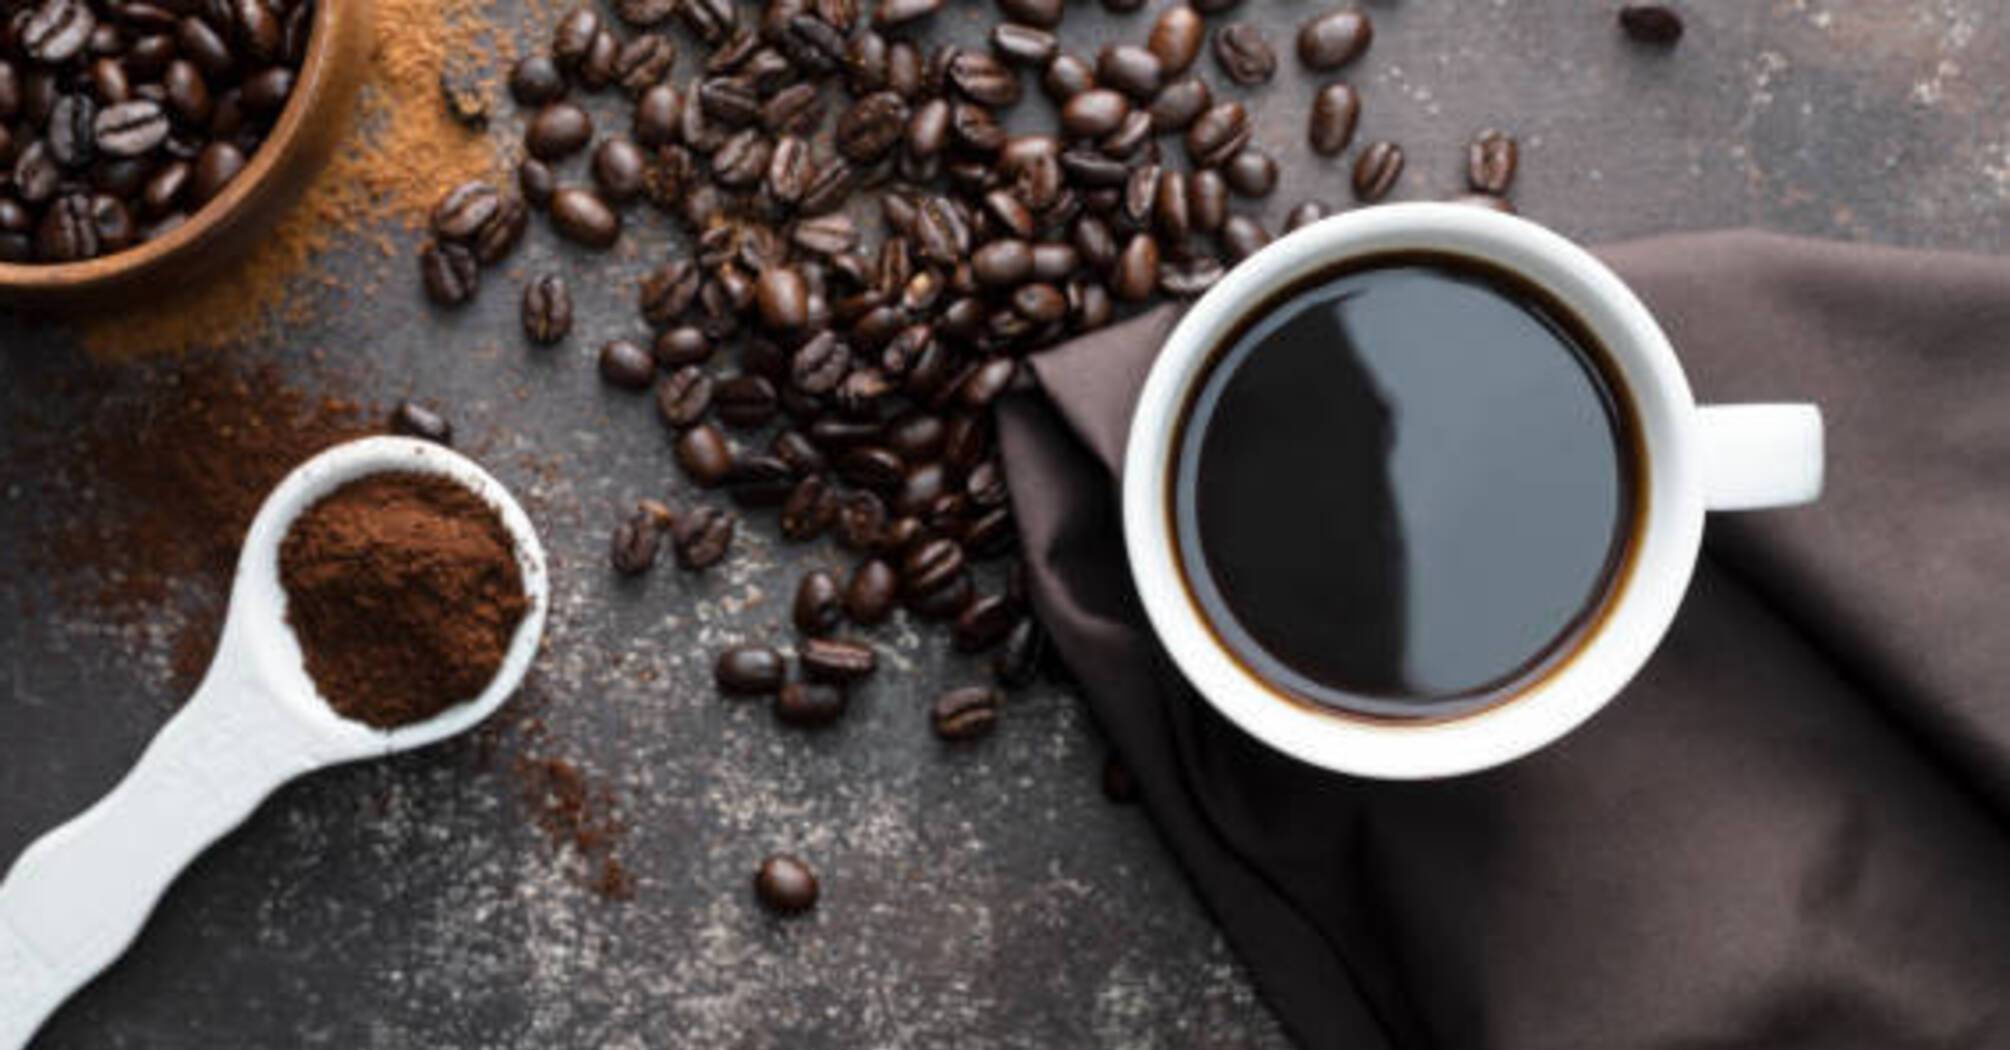 What to add to coffee for flavor and aroma: 5 interesting tips